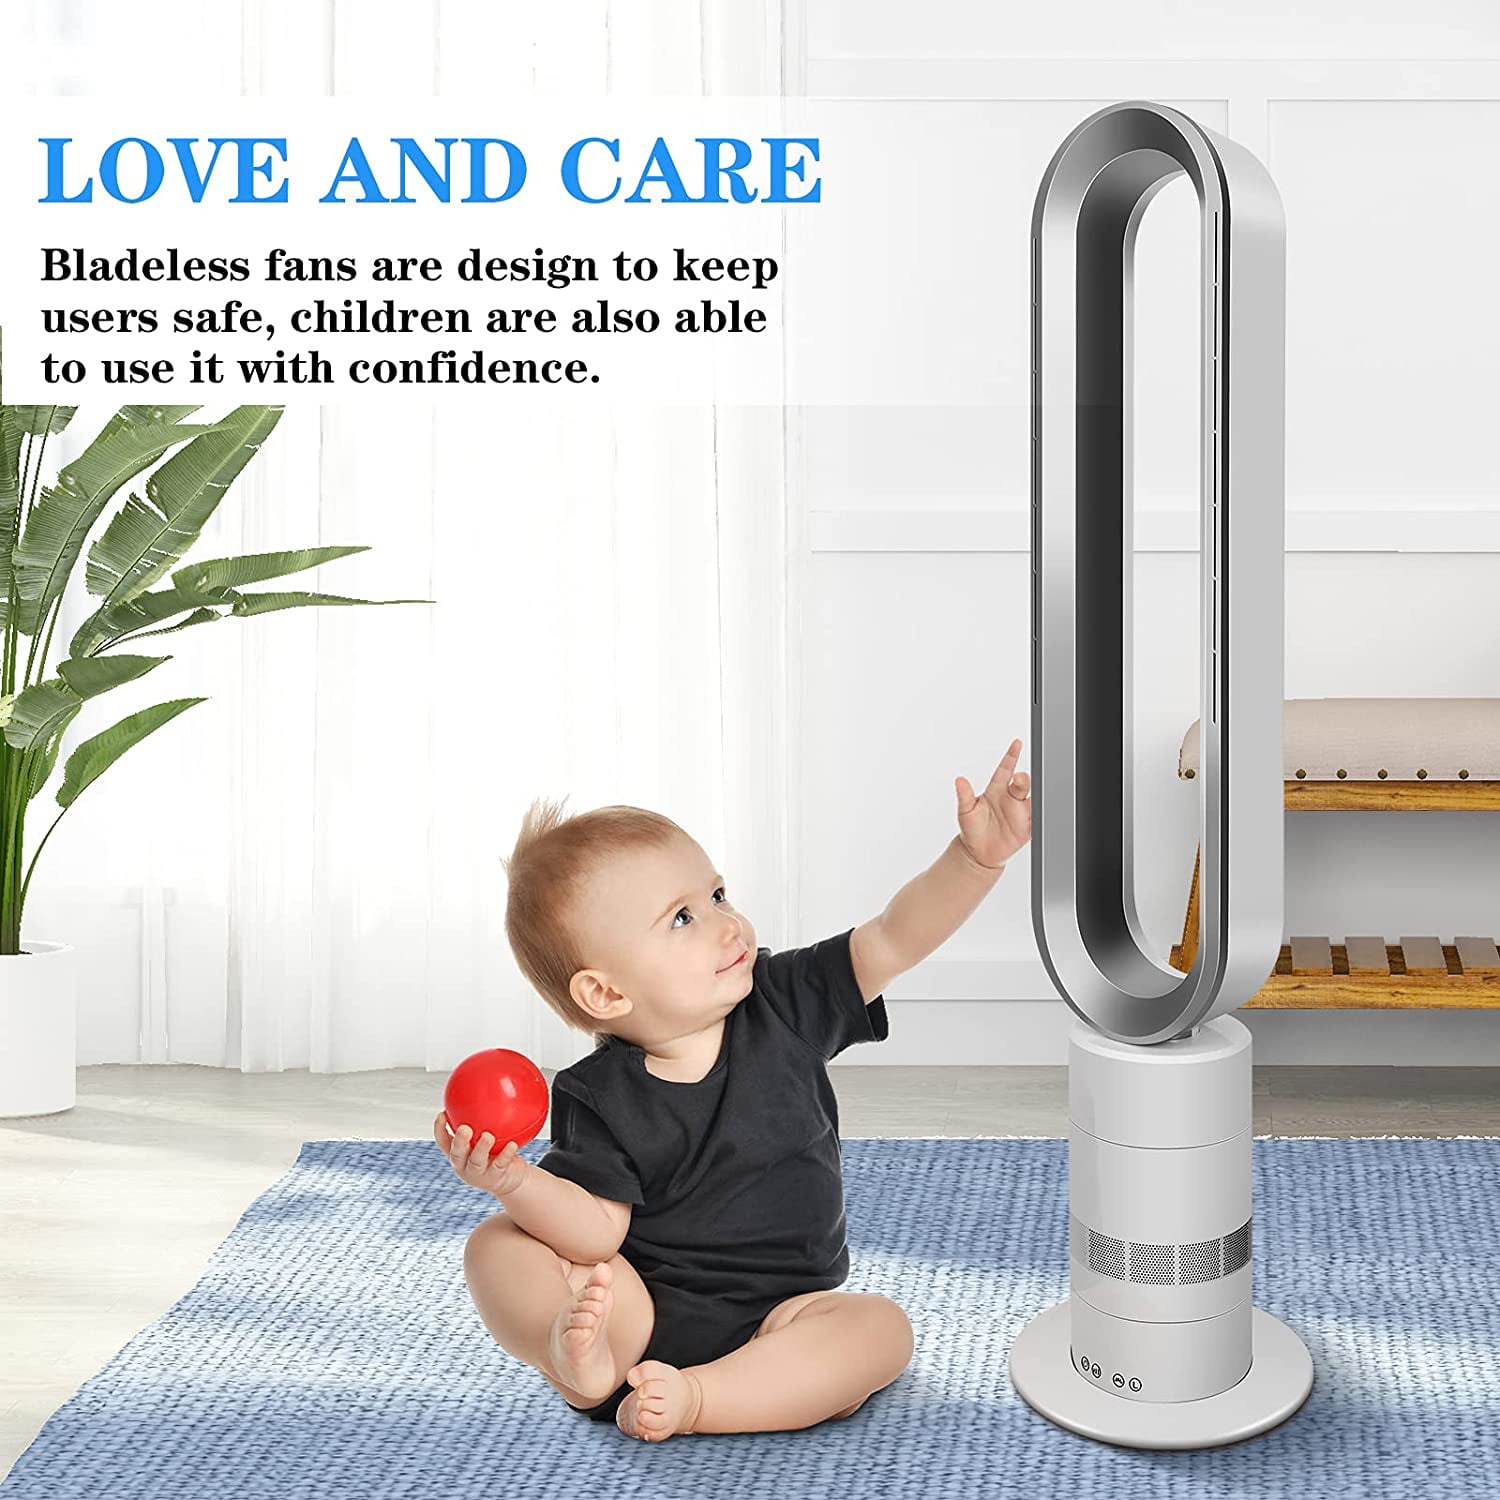 25.6 inch Super Silent Negative Ions Safety Air Cooler Leafless Fan Pink Office Floor-standing Remote Control Tower Fan for Home EZSMART Bladeless Fan Bedroom 